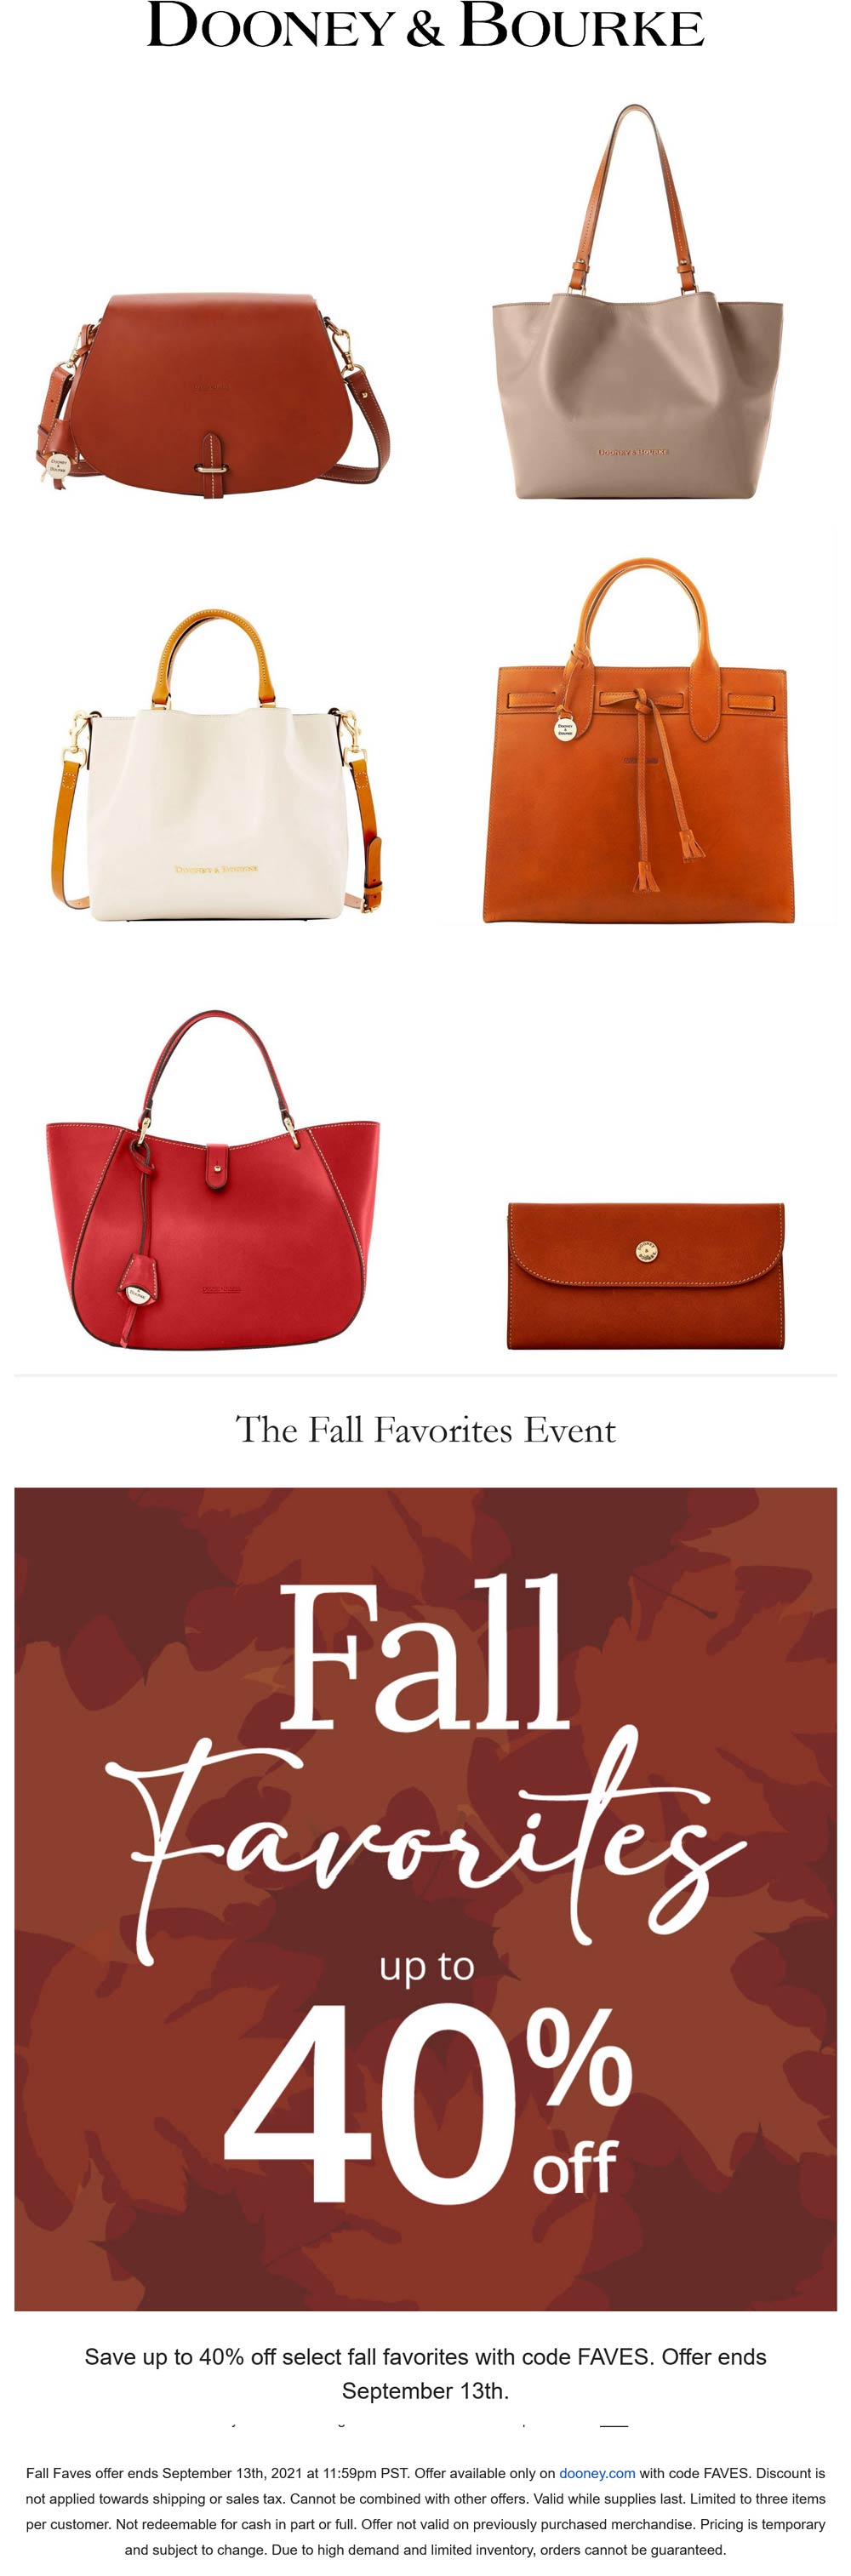 Dooney & Bourke stores Coupon  40% off fall faves at Dooney & Bourke via promo code FAVES #dooneybourke 